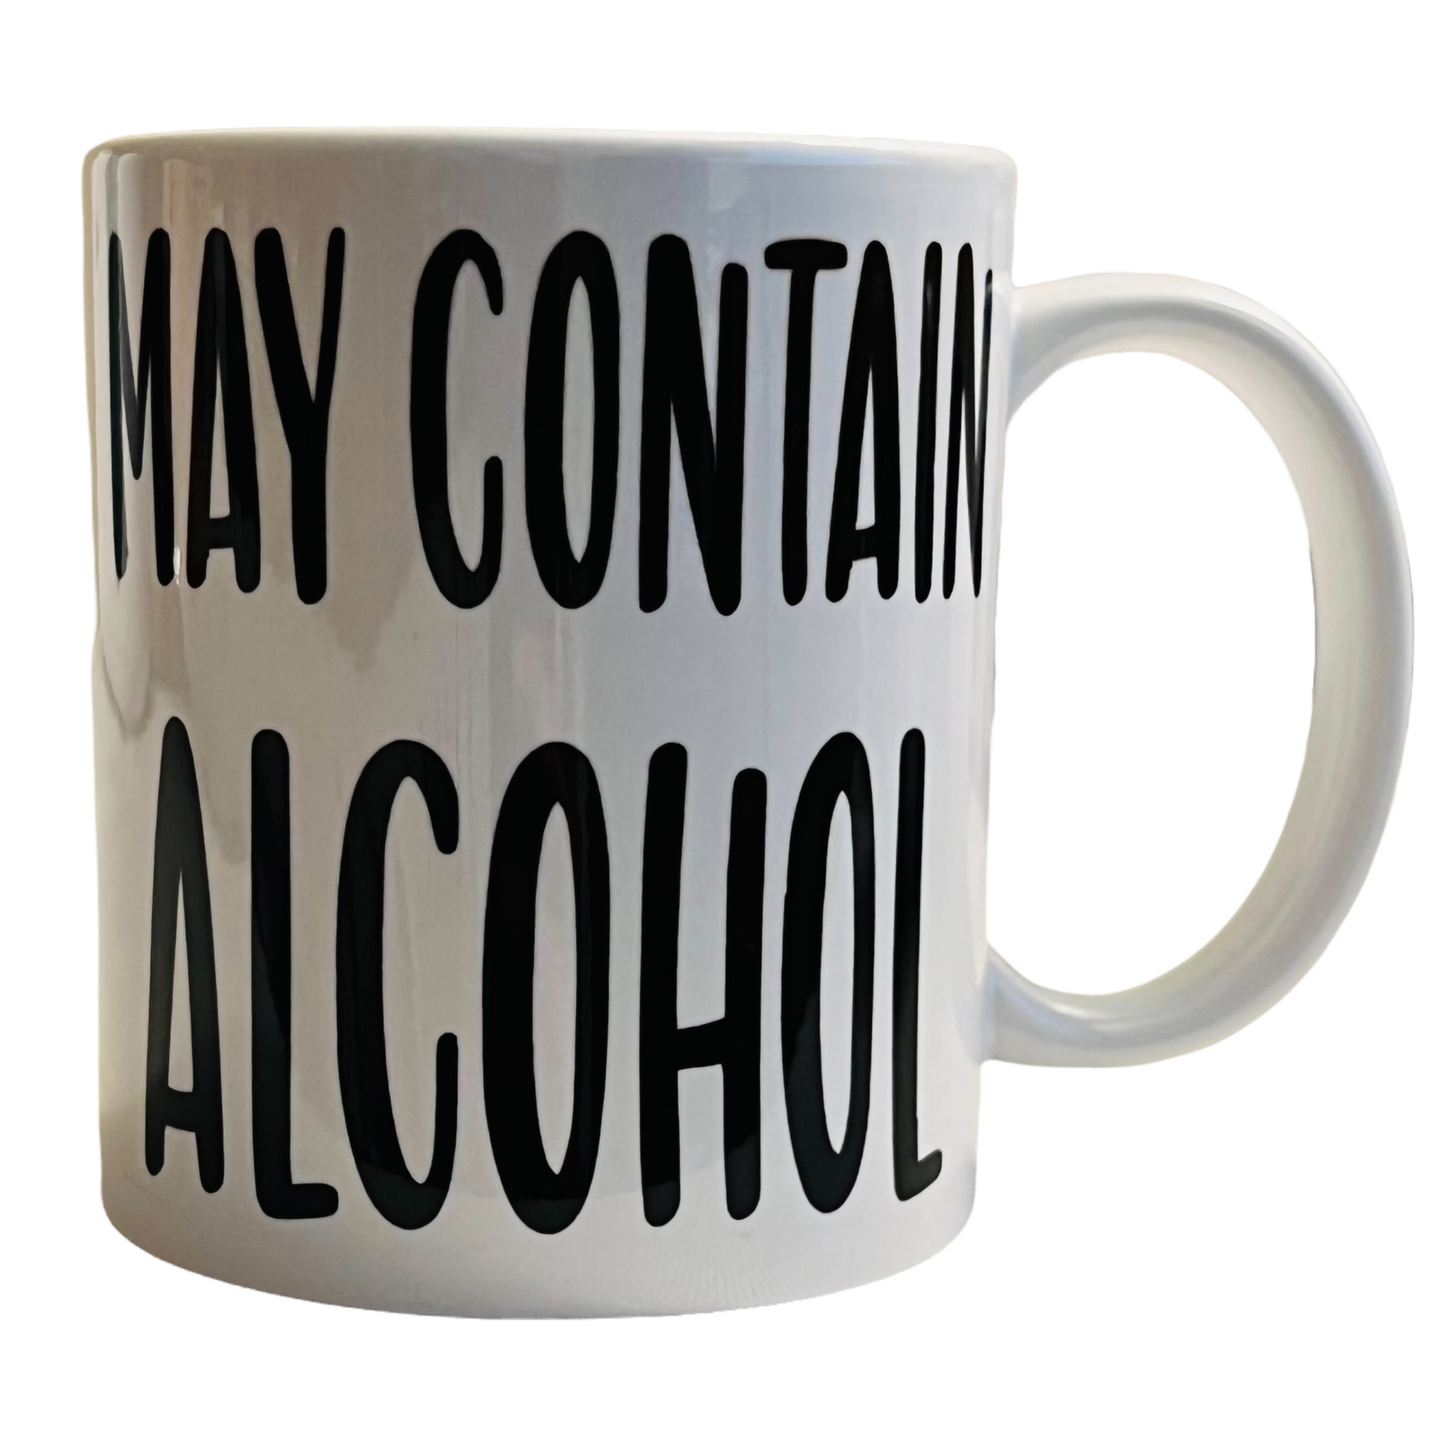 JenDore " Day Drinking from a Mug to Keep things Professional / May Contain Alcohol " 12oz Coffee Tea Mug